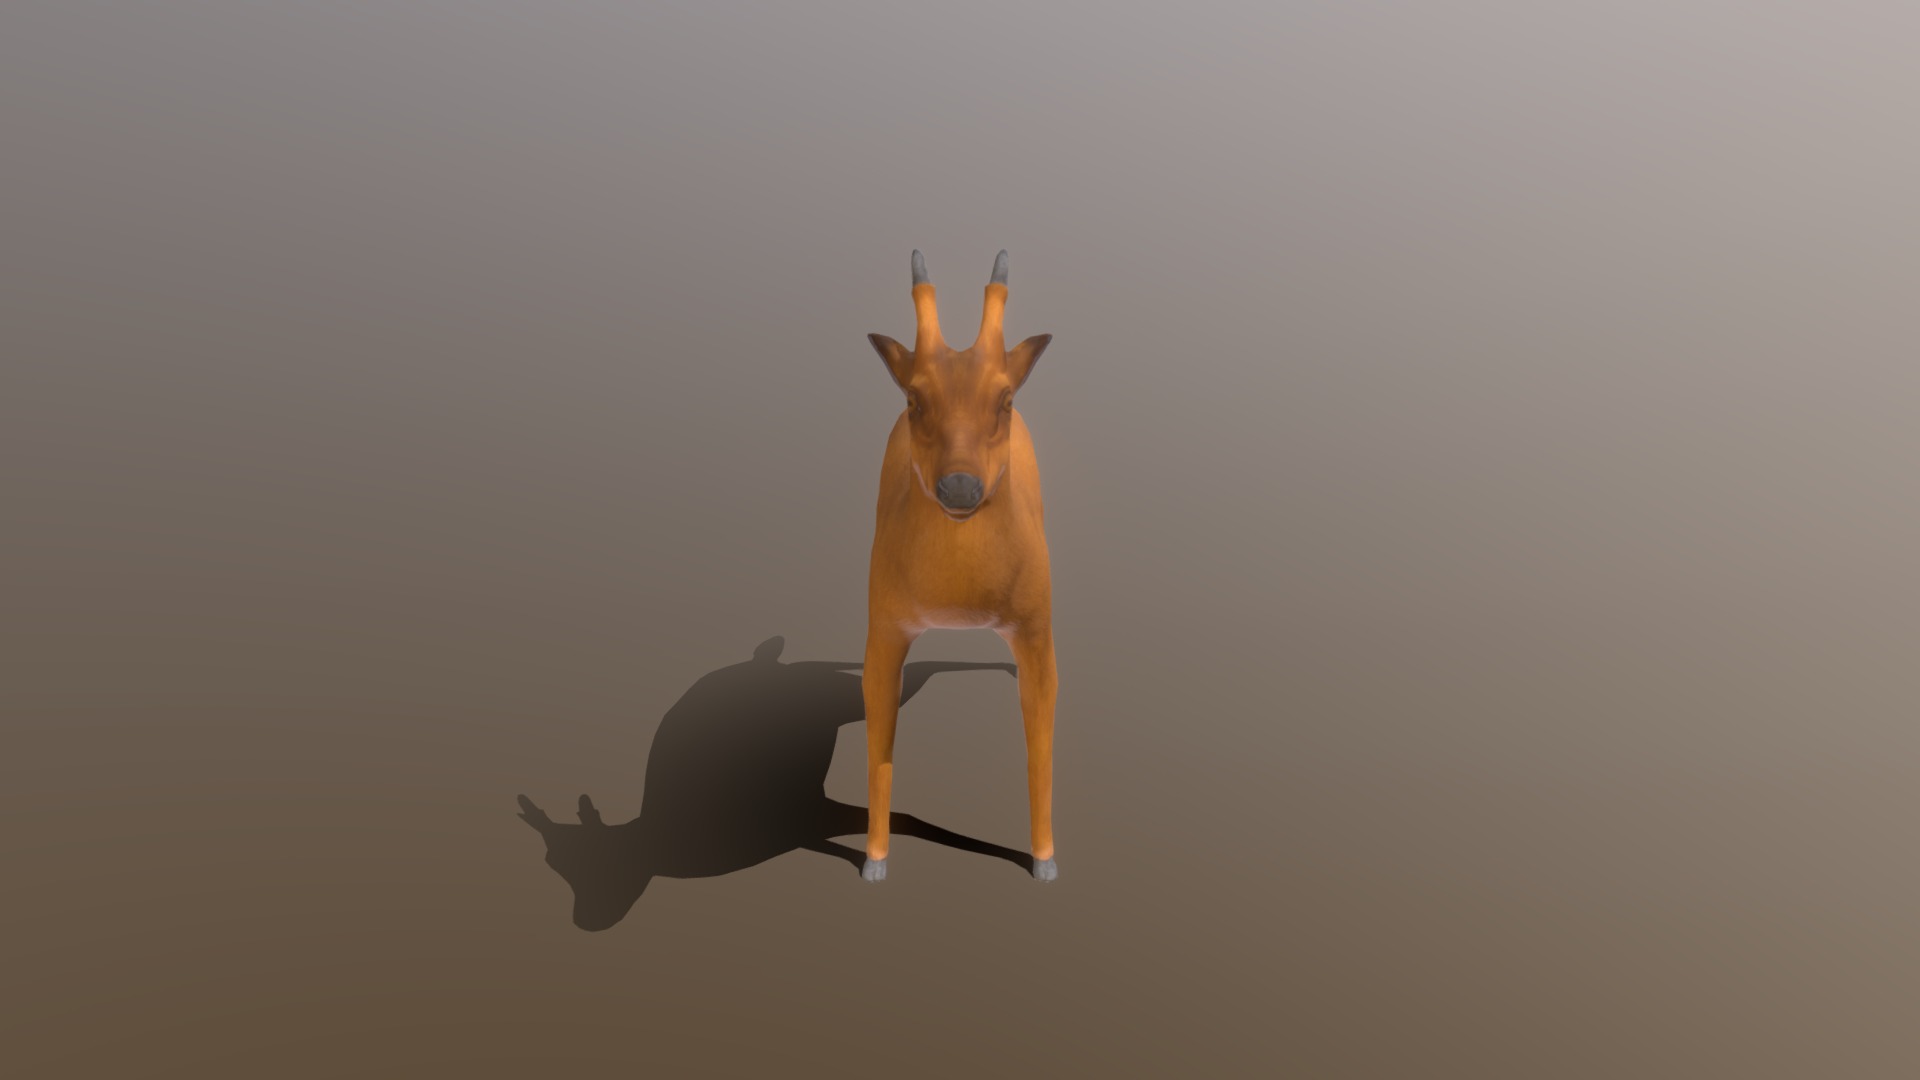 3D model Deer - This is a 3D model of the Deer. The 3D model is about a dog standing on a surface.